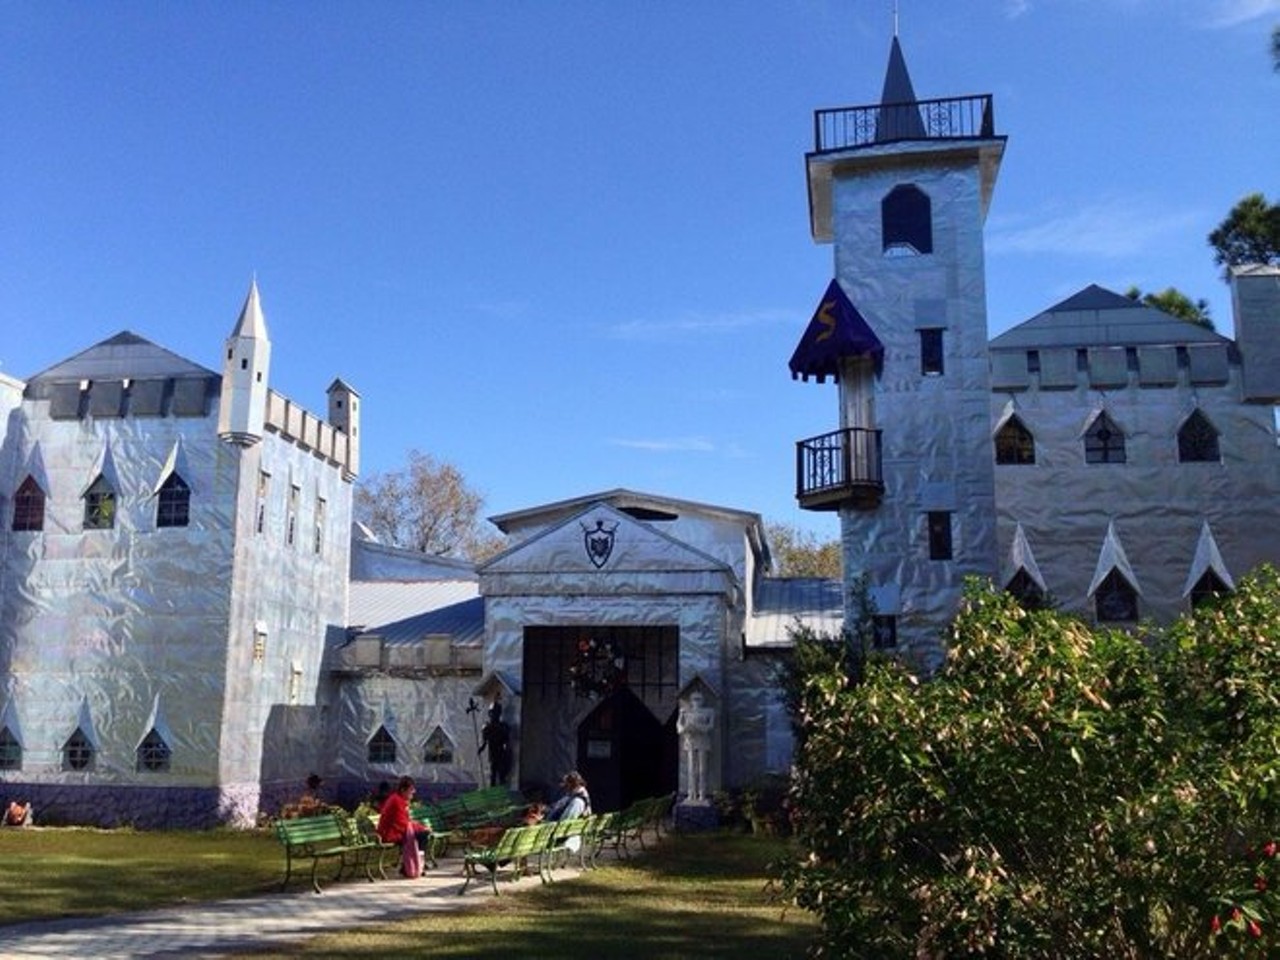 Solomon&#146;s Castle, Ona
4533 Solomon Rd, Ona
Designed and built by Howard Solomon, the castle-style home, which is constantly being added to, covers 12,000 square feet and stands (at the moment) three stories high. It's also an eccentric art gallery. 
Photo via Yelp